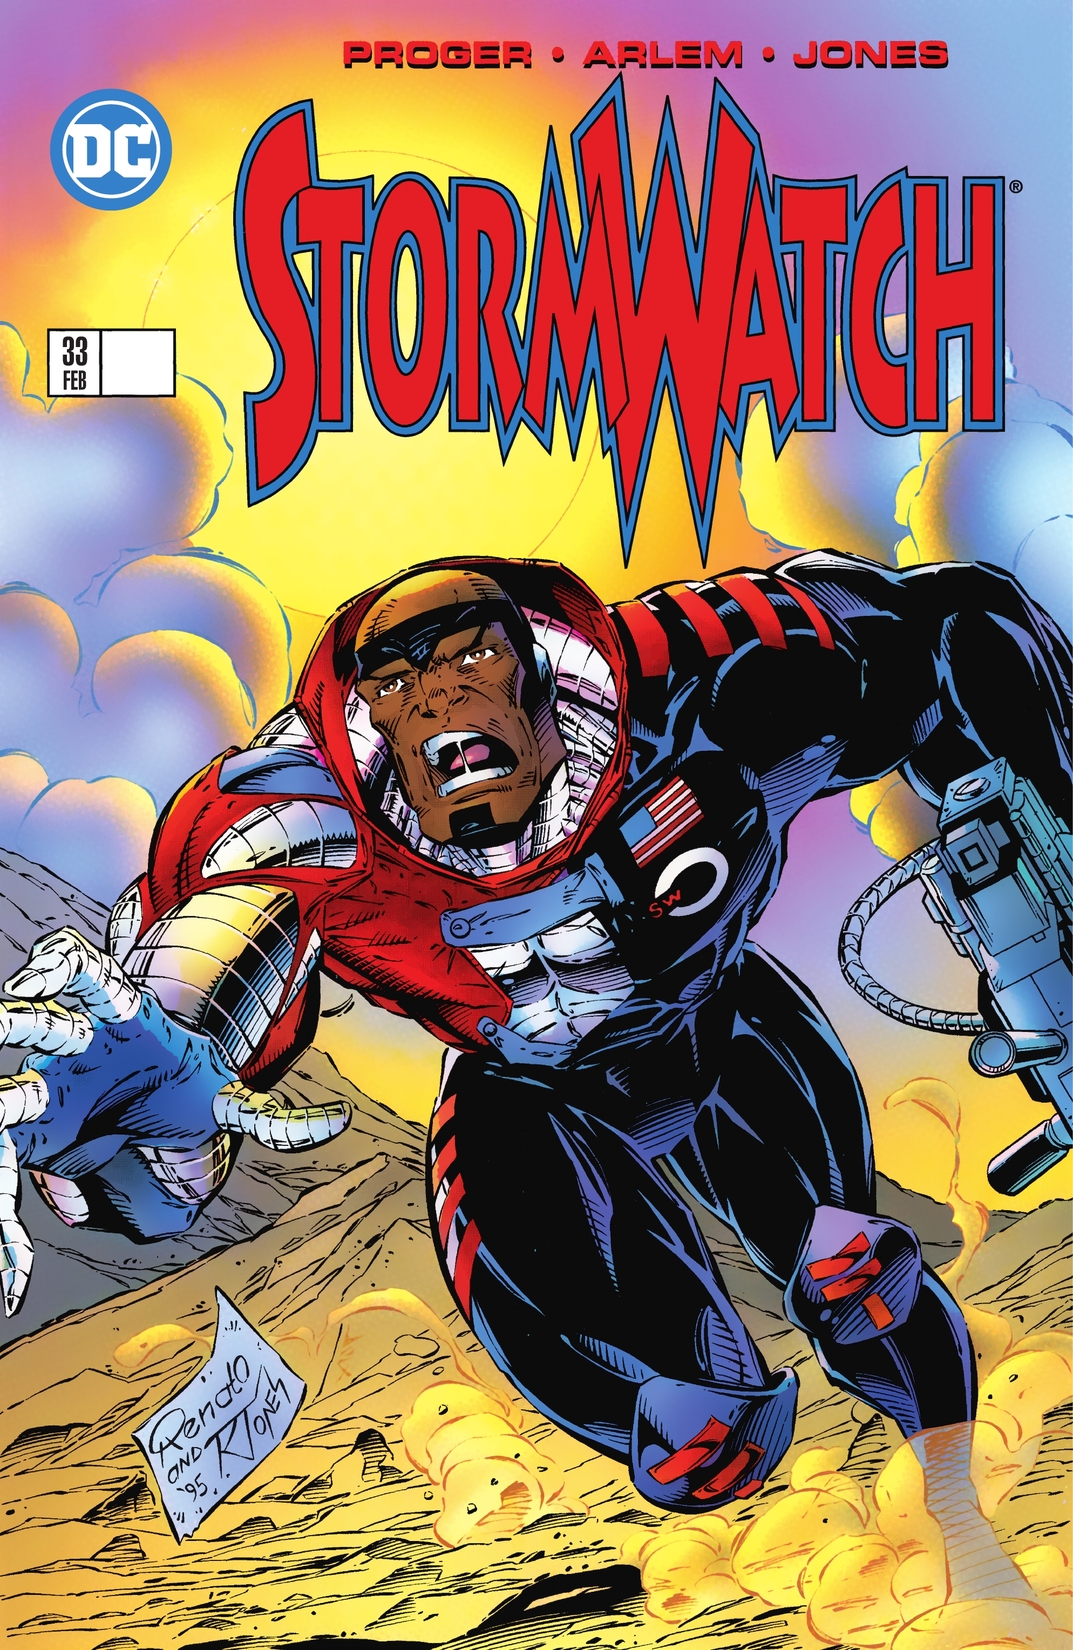 Stormwatch (1993-1997) #33 preview images